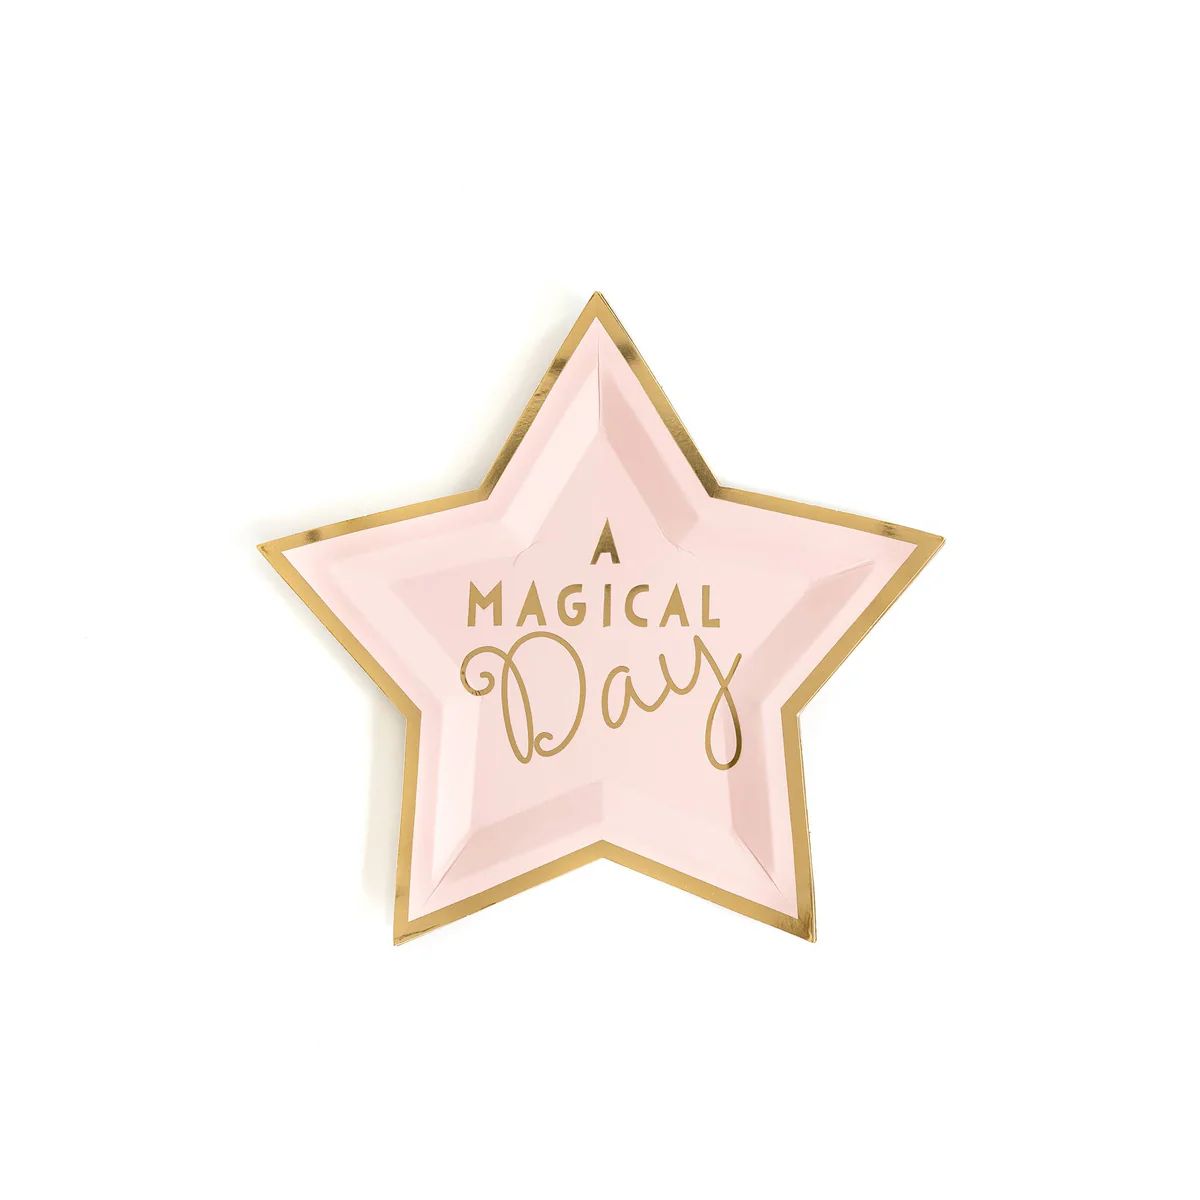 A Magical Day Star Plates | Ellie and Piper